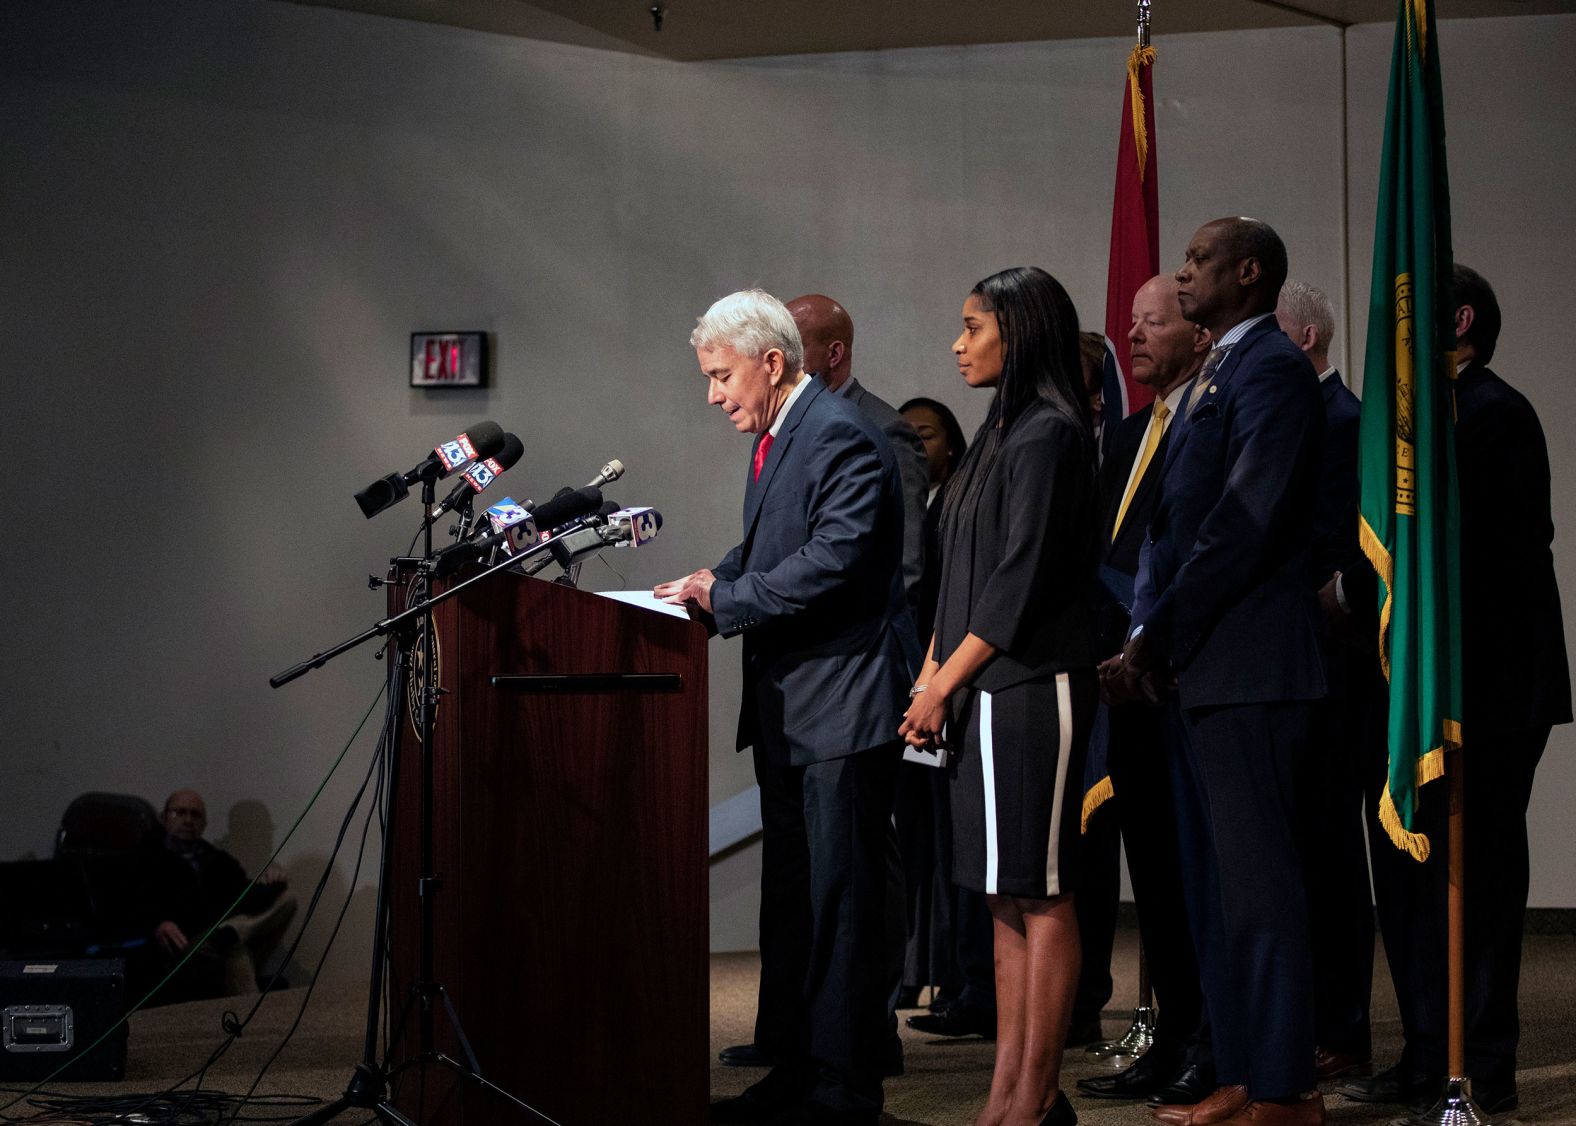 Steve Mulroy, the district attorney in Shelby County, Tennessee, speaks to the press after five former Memphis police officers <a href="index.php?page=&url=https%3A%2F%2Fwww.cnn.com%2Fus%2Flive-news%2Ftyre-nichols-memphis-news-1-26-23%2Fh_e8650a672aab1daed0c66c88187274a7" target="_blank">were charged with murder</a> on Thursday, January 26. The criminal charges come about three weeks after Tyre Nichols, a 29-year-old Black man, was hospitalized after a traffic stop and "confrontation" with Memphis police that family attorneys have called a savage beating. <a href="index.php?page=&url=https%3A%2F%2Fwww.cnn.com%2F2023%2F01%2F26%2Fus%2Ftyre-nichols-memphis-thursday%2Findex.html" target="_blank">Nichols died from his injuries</a> on January 10, three days after the arrest, authorities said. The five police officers, who are also Black, had been fired for violating policies on excessive use of force, duty to intervene and duty to render aid, the department said.